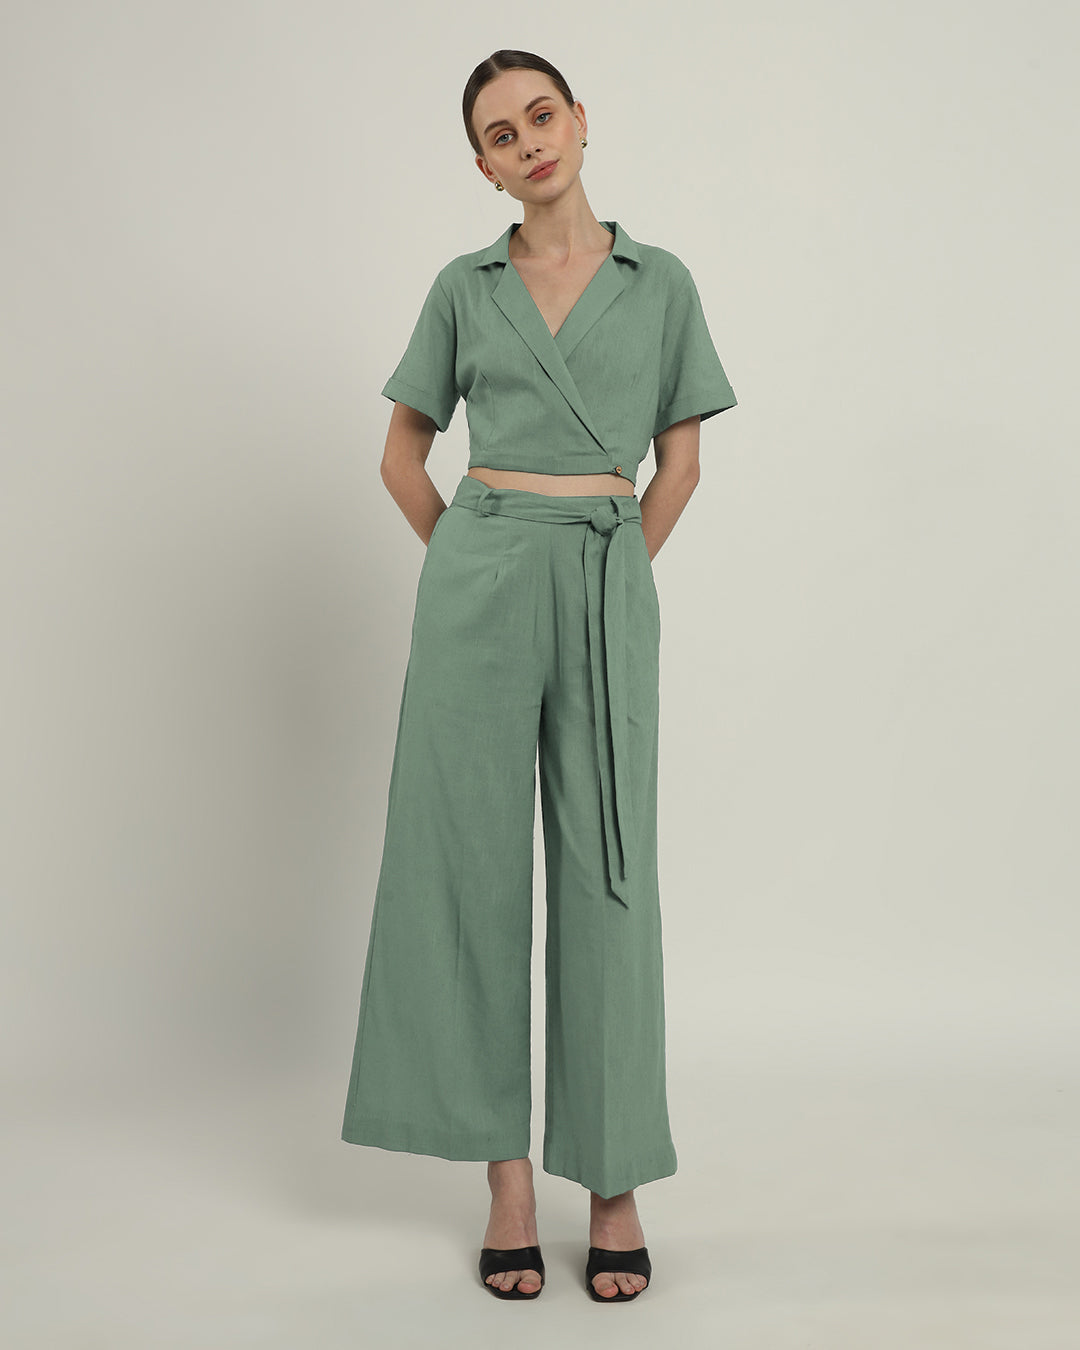 Lapel Collar Solid Mint Top (Without Bottoms)